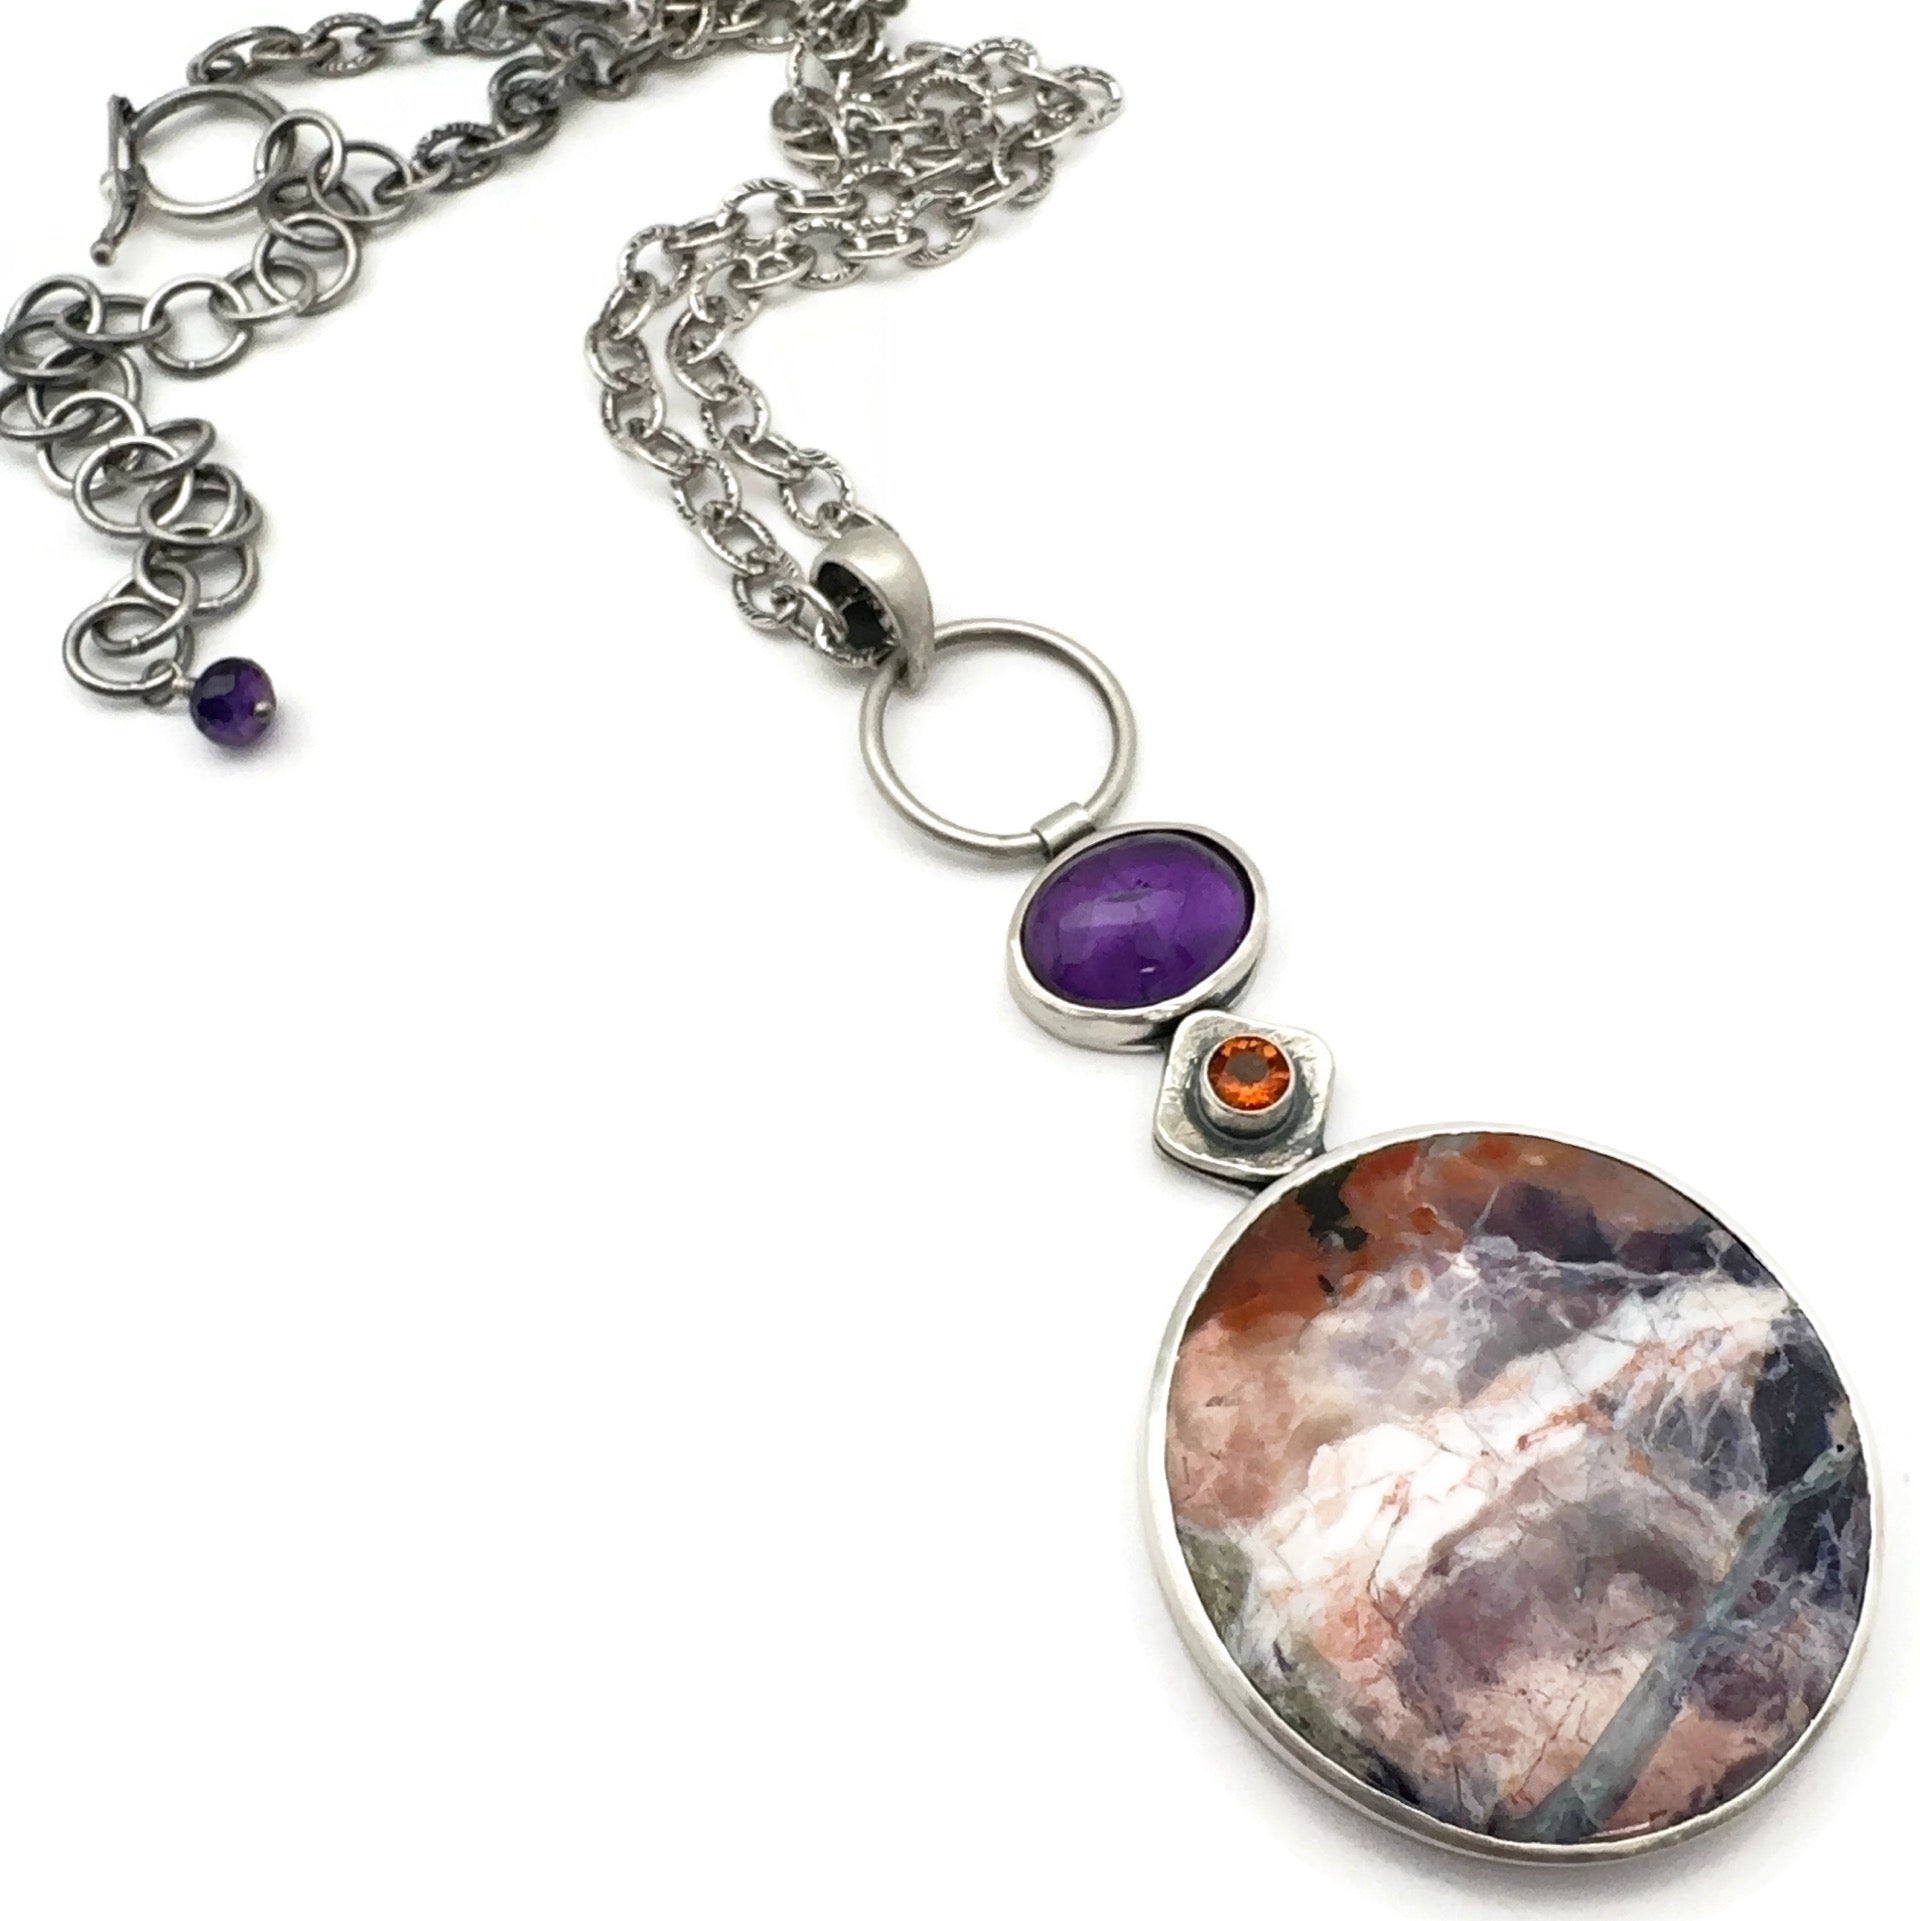 Tiffany Stone, Amethyst, and Fire Citrine Necklace